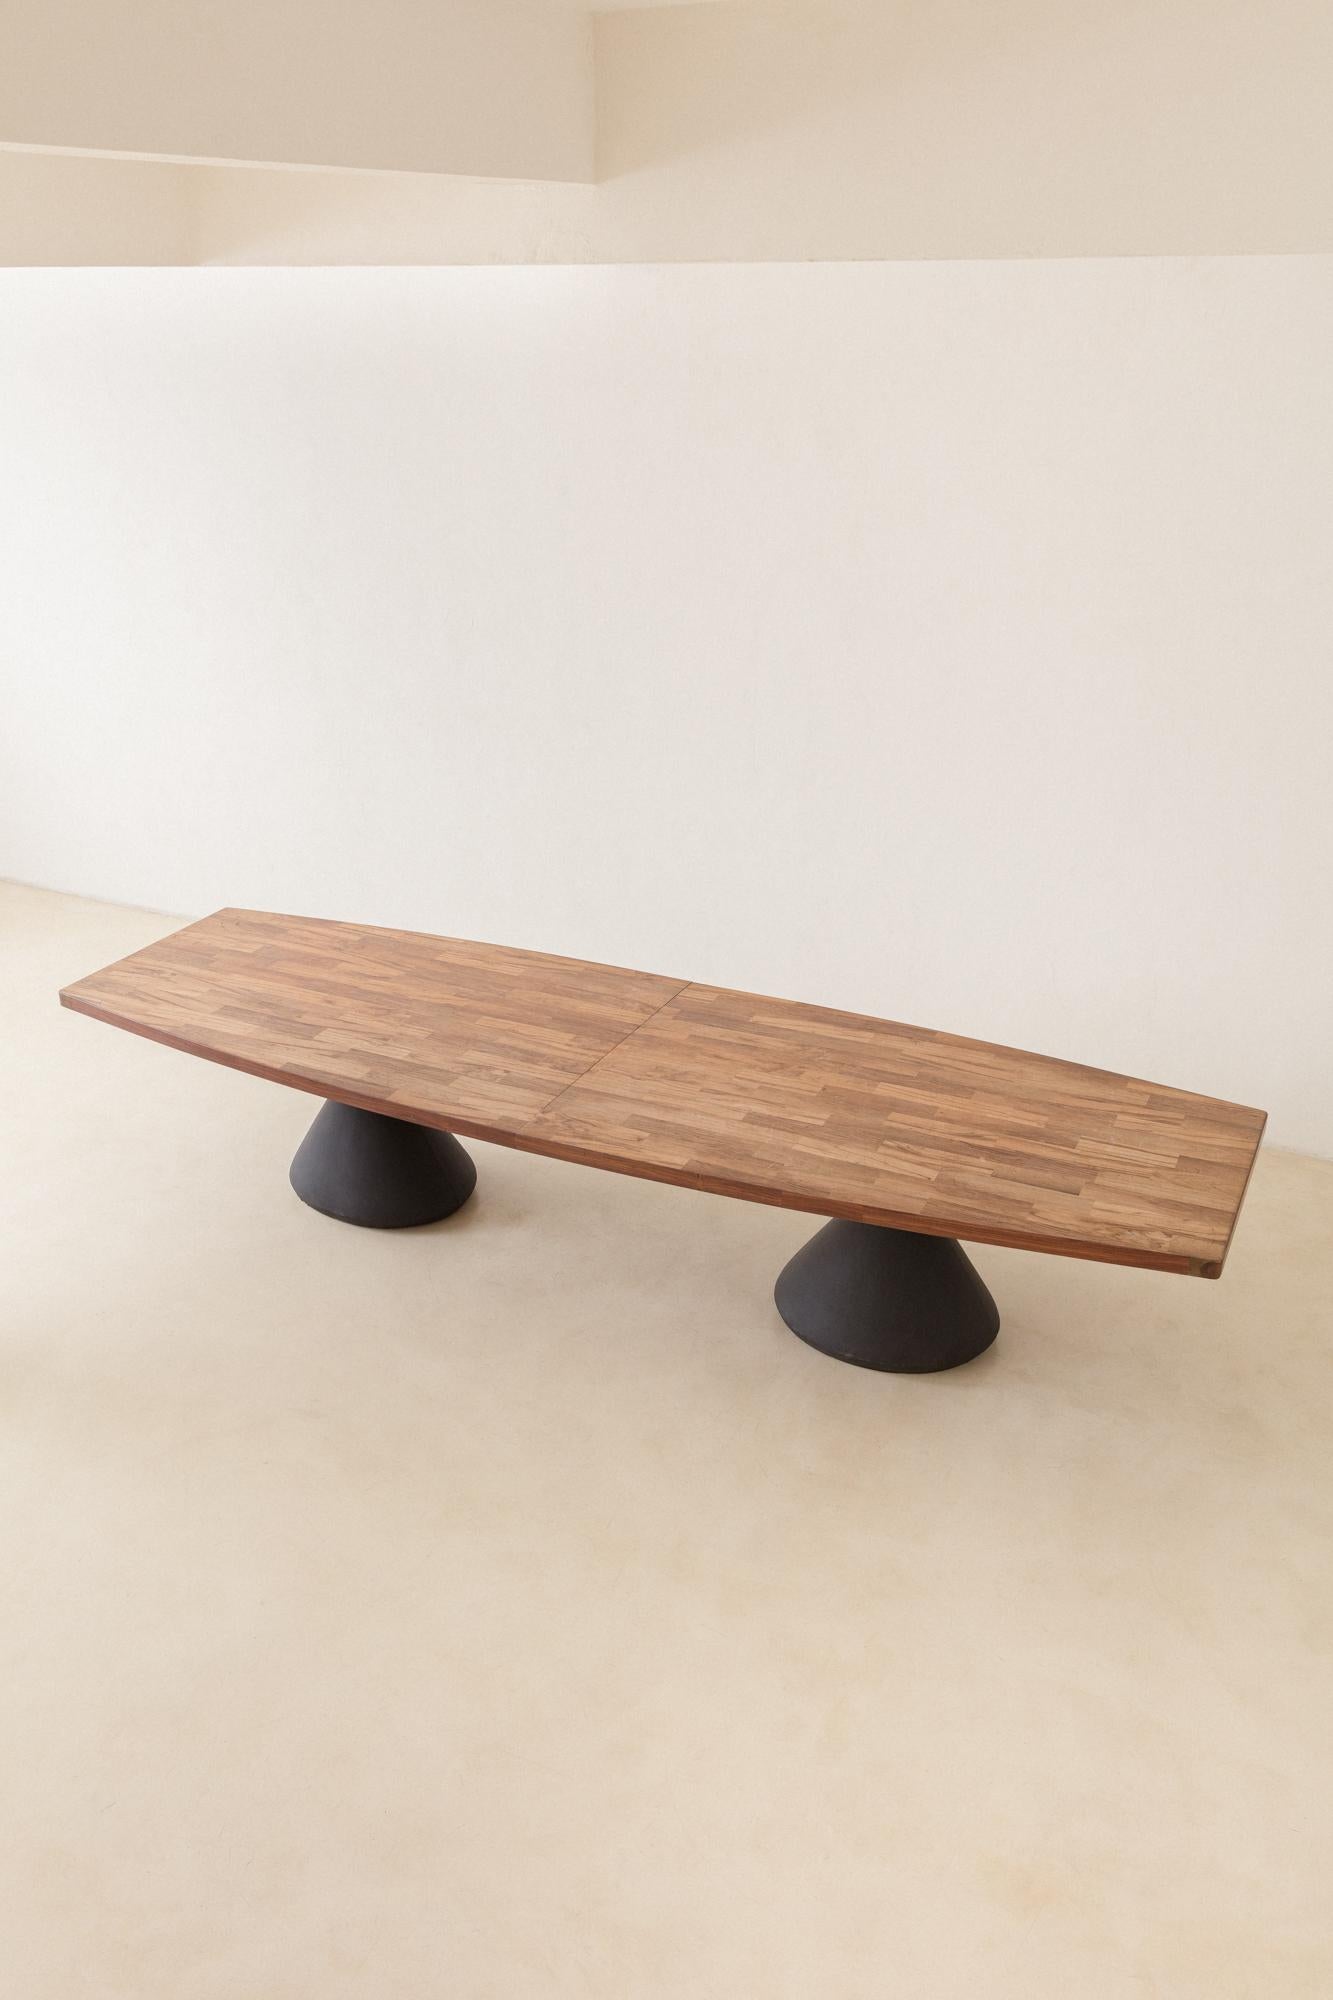 Leather Jorge Zalszupin 'Guanabara' Rosewood Vintage Dining Table, 1960s, Brazil